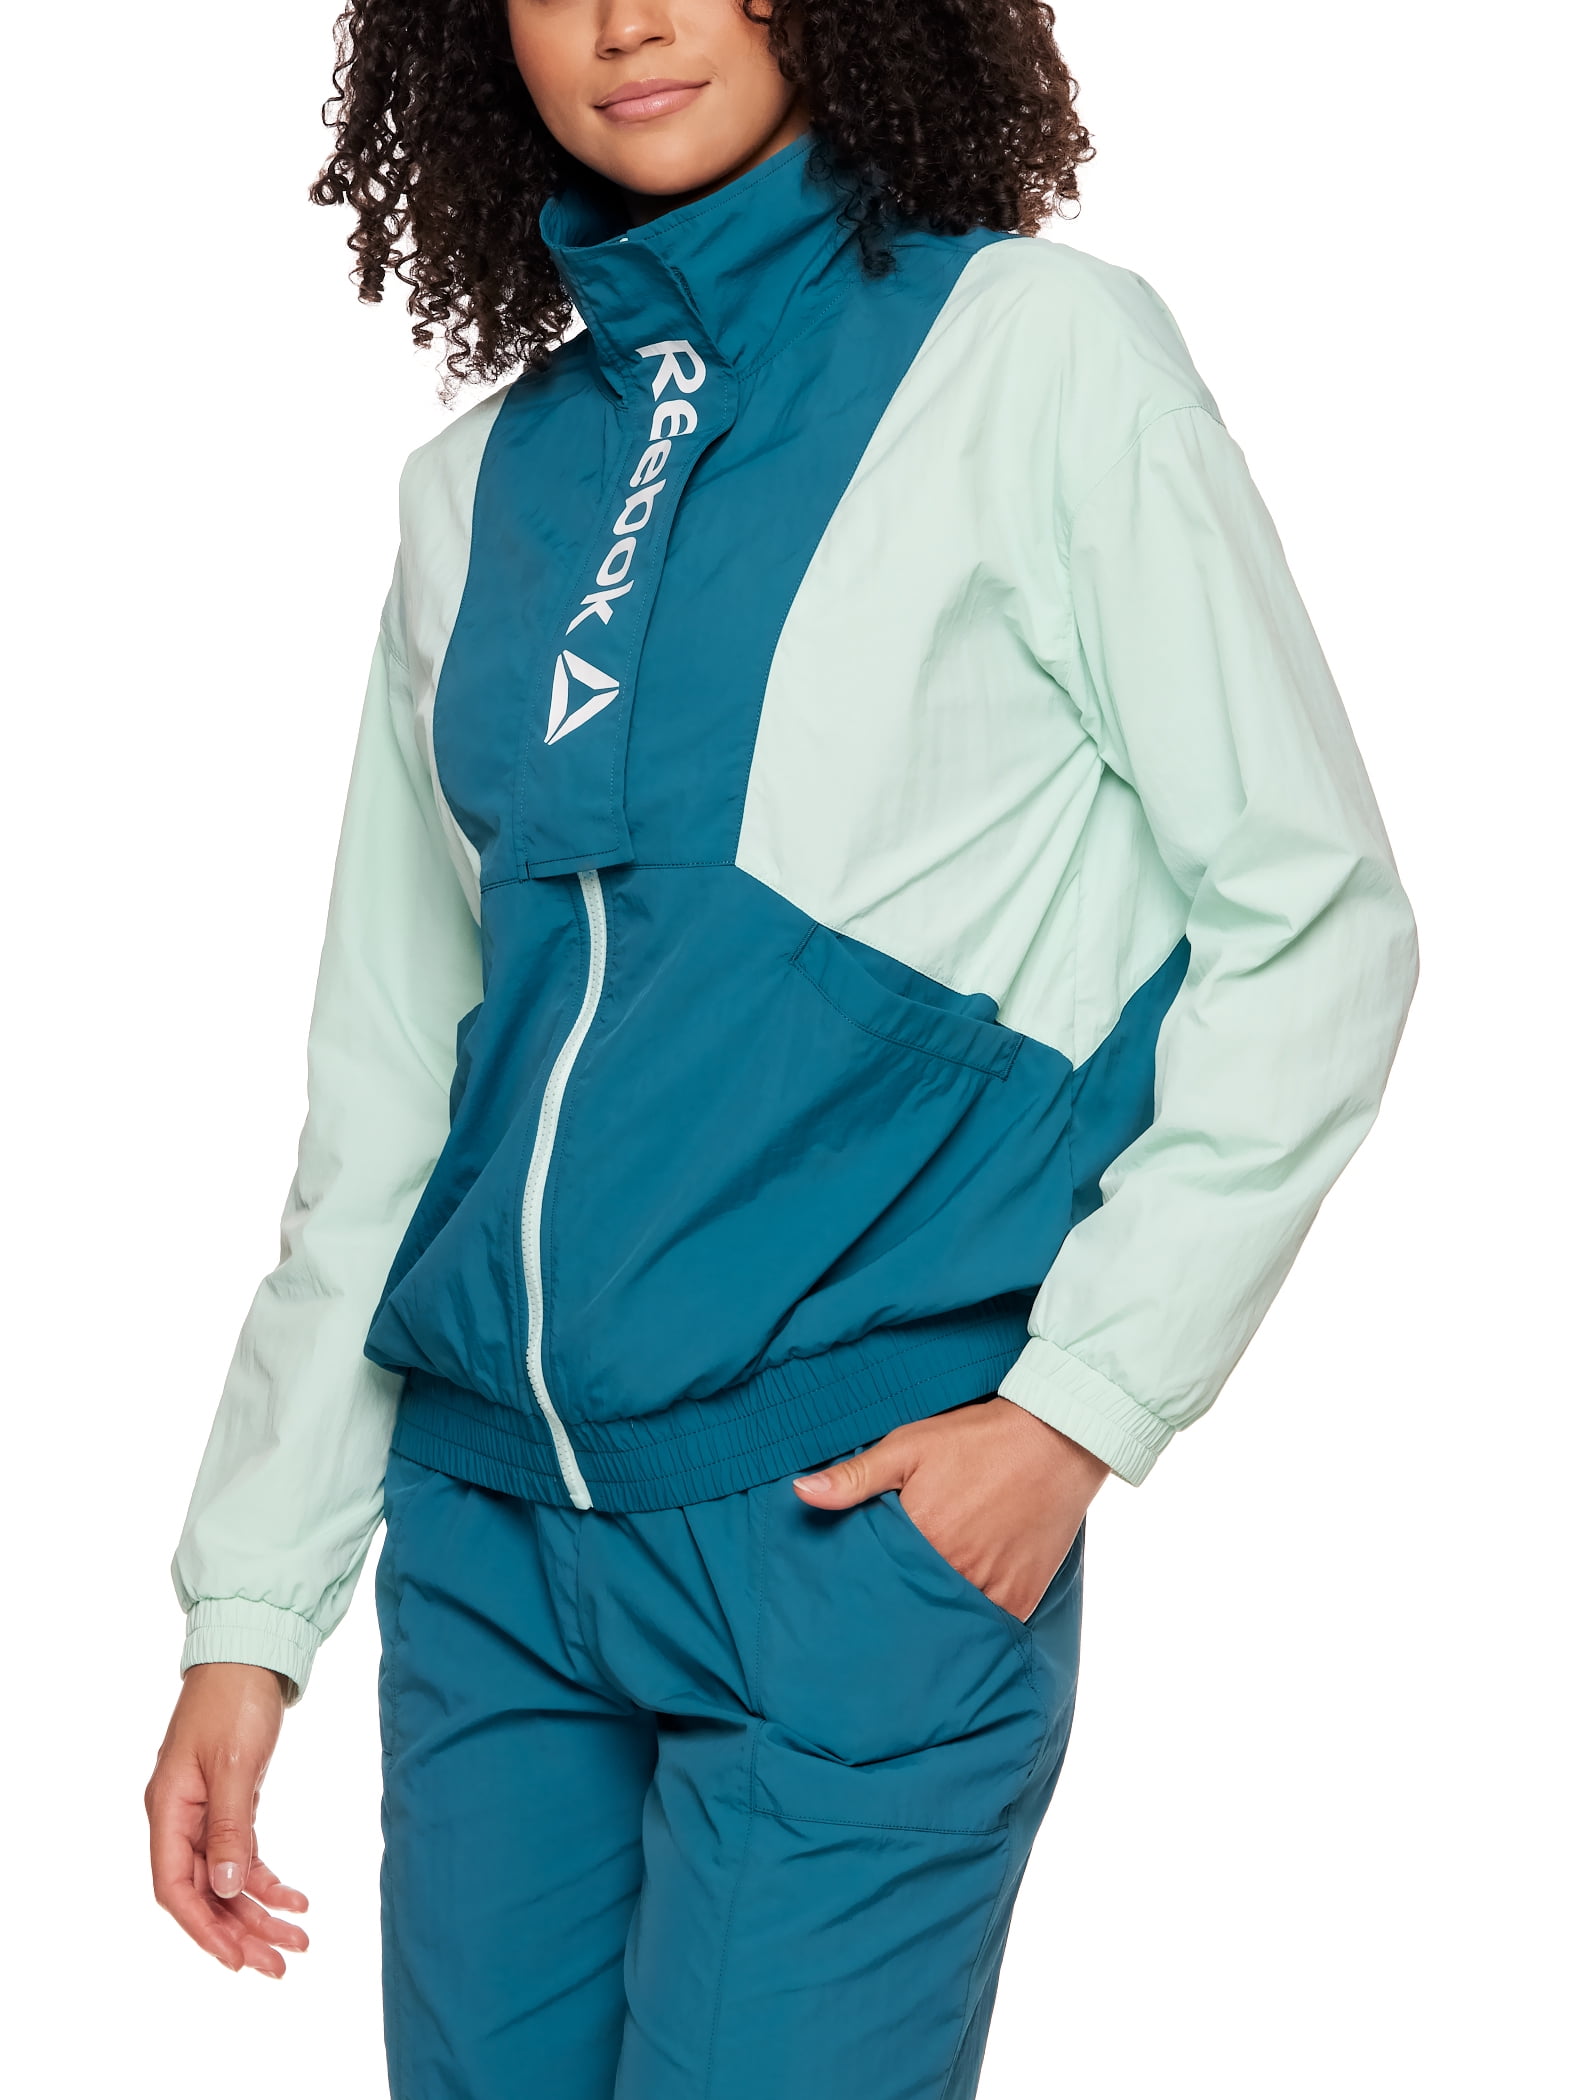 Reebok Women's Focus Track Jacket with Flap and Front Pockets - Walmart.com